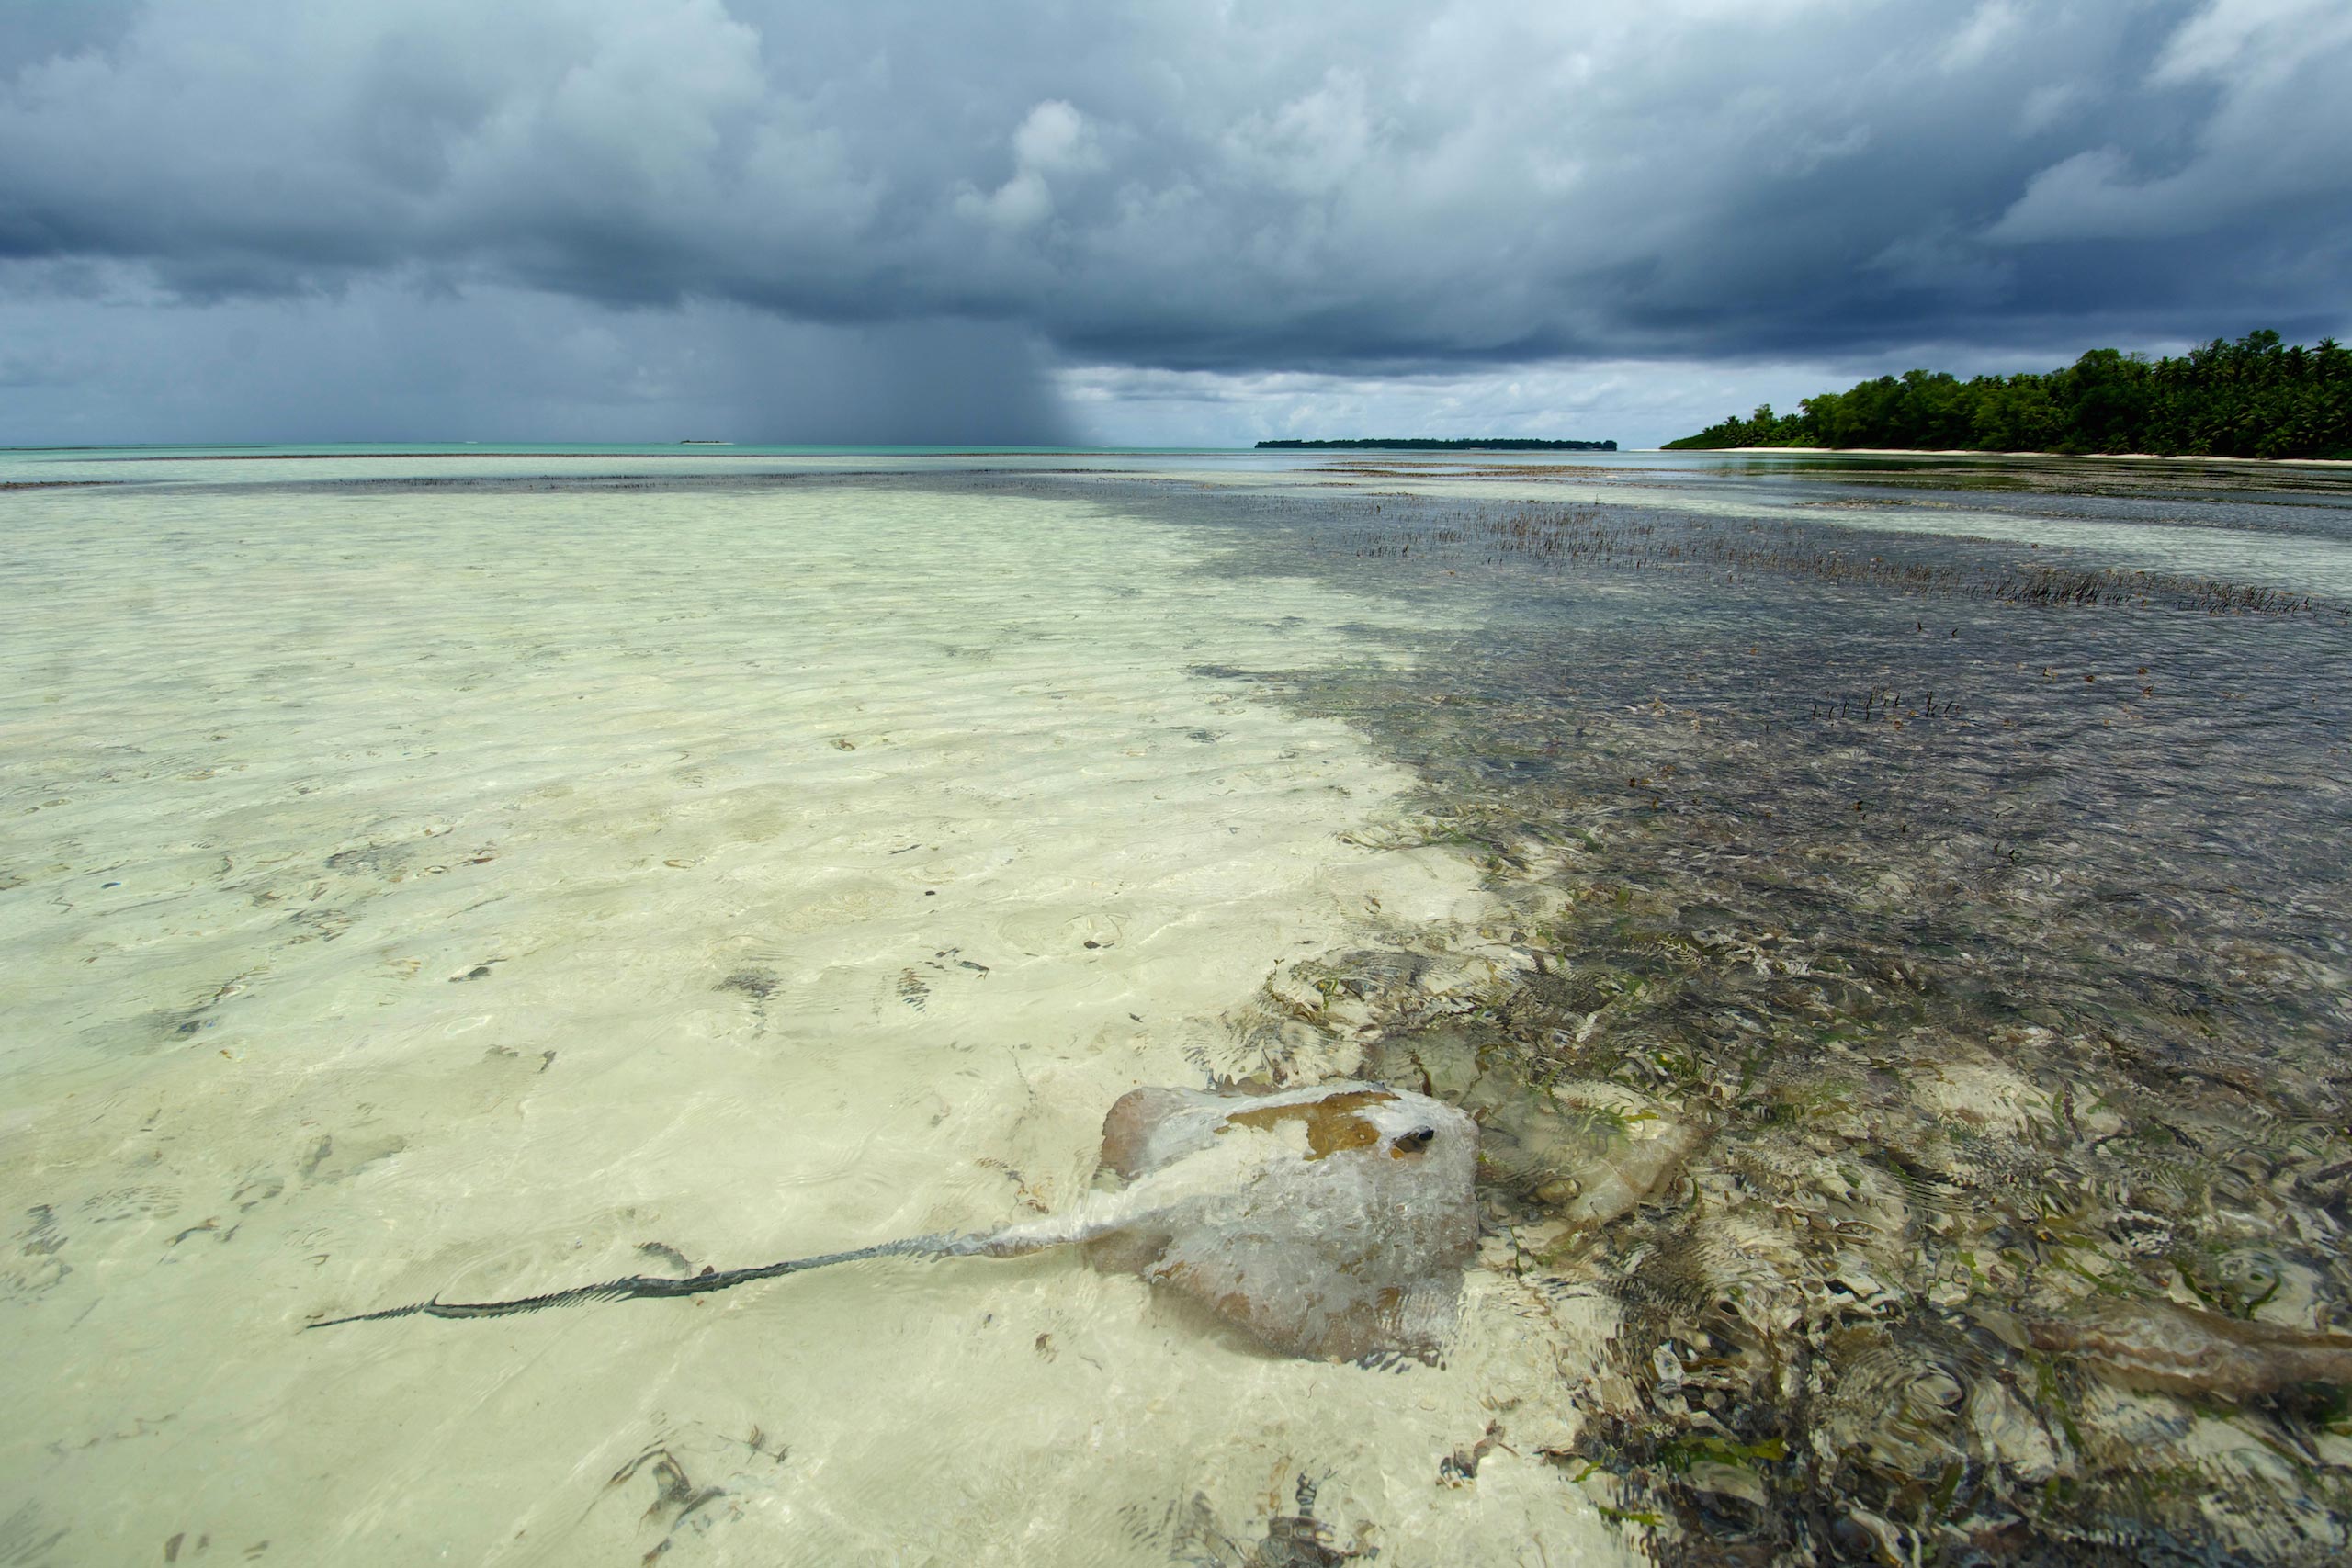 St Joseph’s lagoon provides a perfect nursery ground for stingrays such as this feathertail ray. At high tide, large predators flood into the area to hunt and give birth, but most leave again when the water drains away at low tide.<br>Photo by Rainer von Brandis | © Save Our Seas Foundation